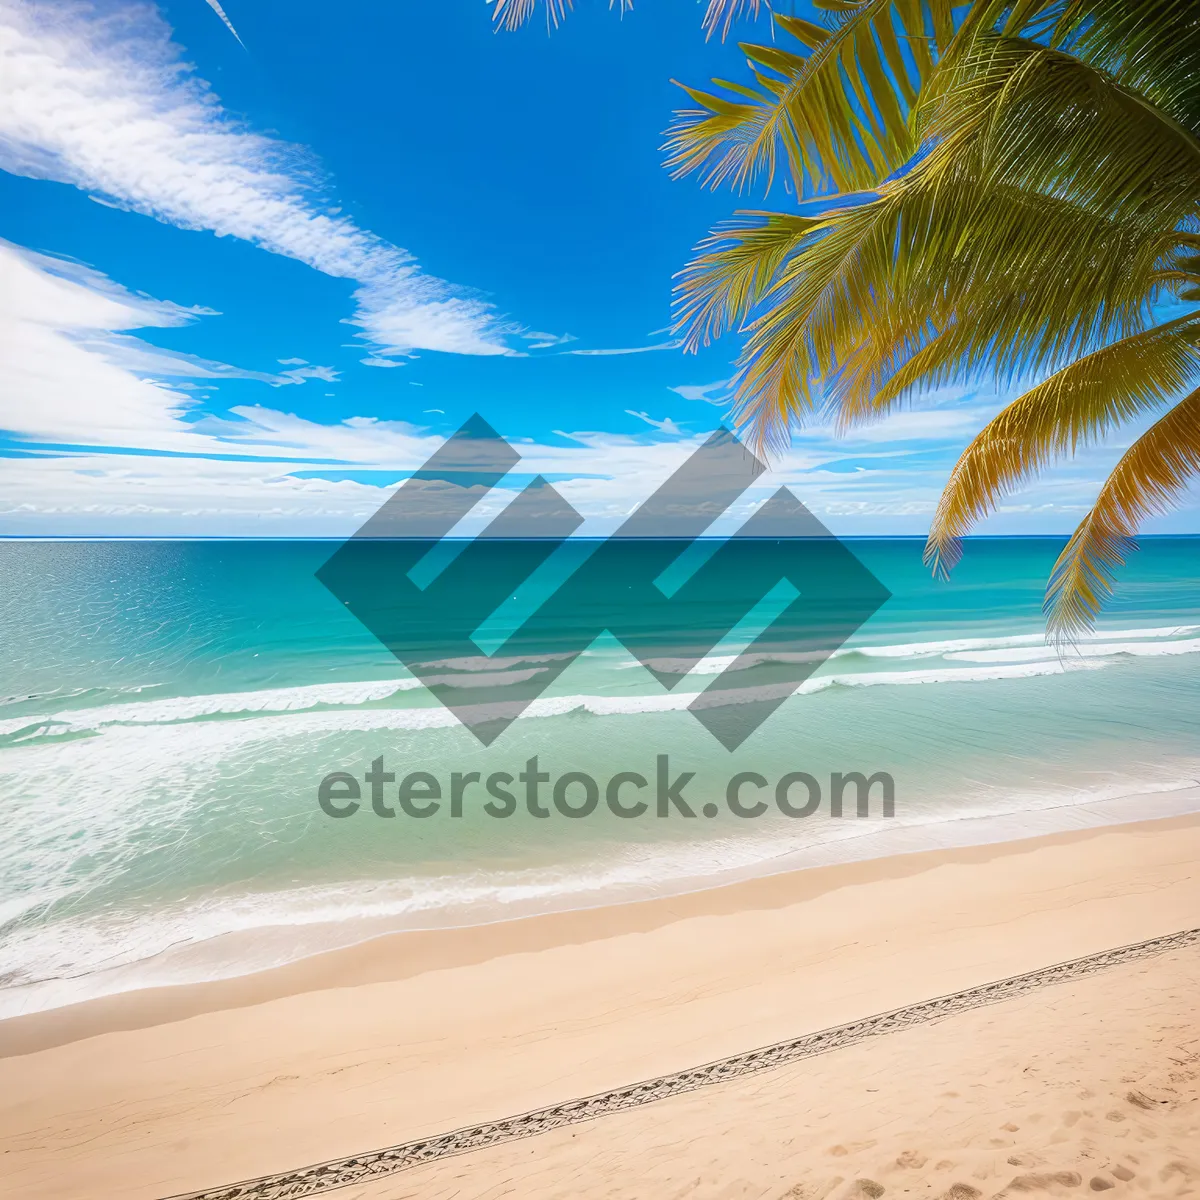 Picture of Serenity by the Turquoise Tropical Ocean